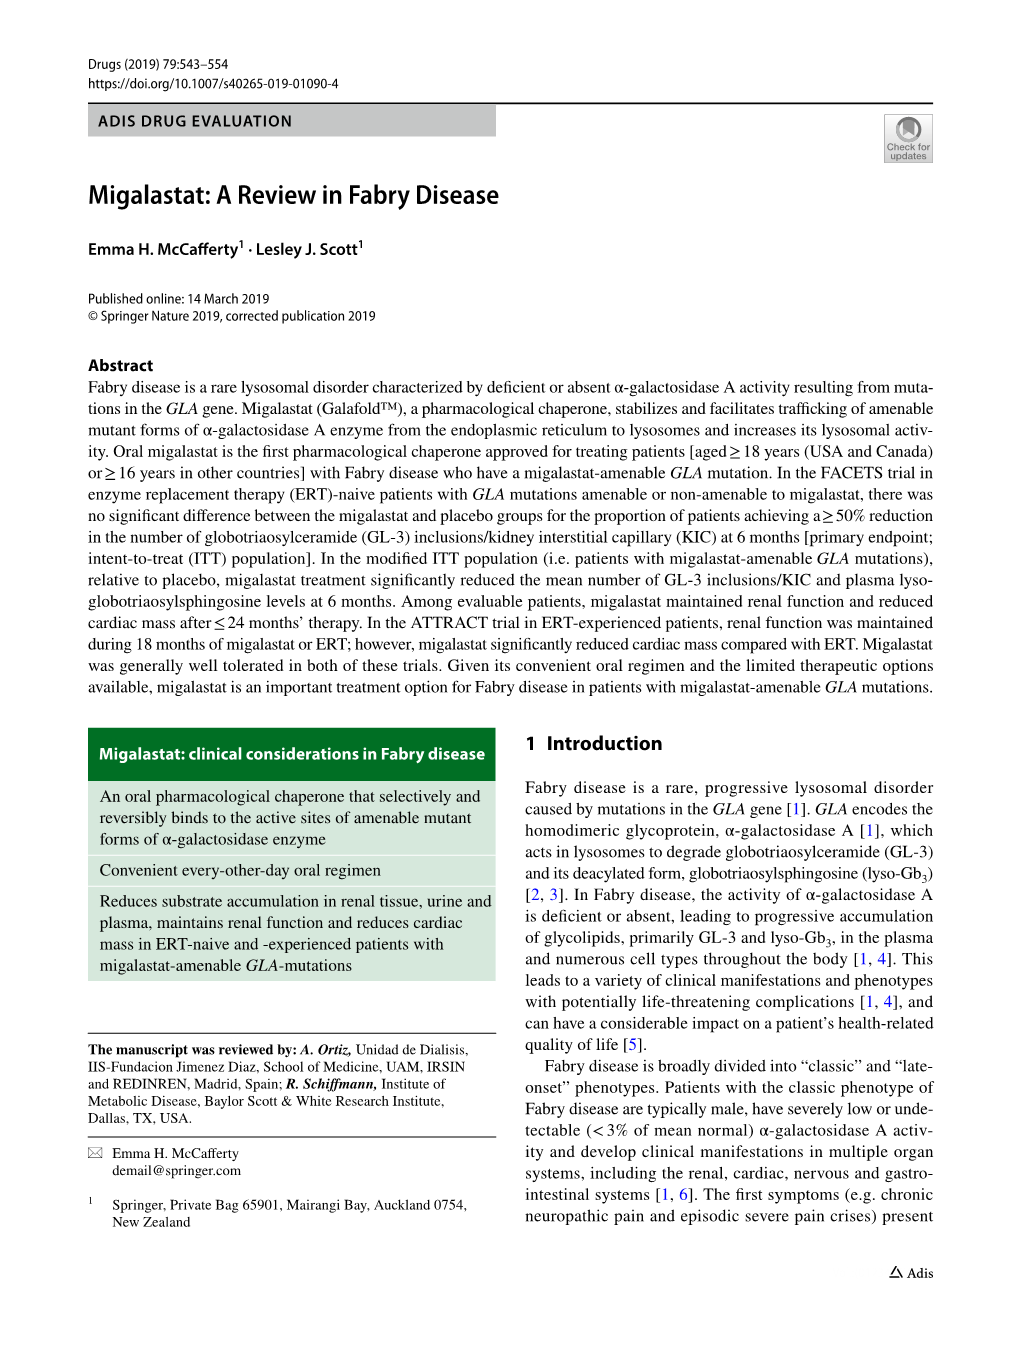 Migalastat: a Review in Fabry Disease